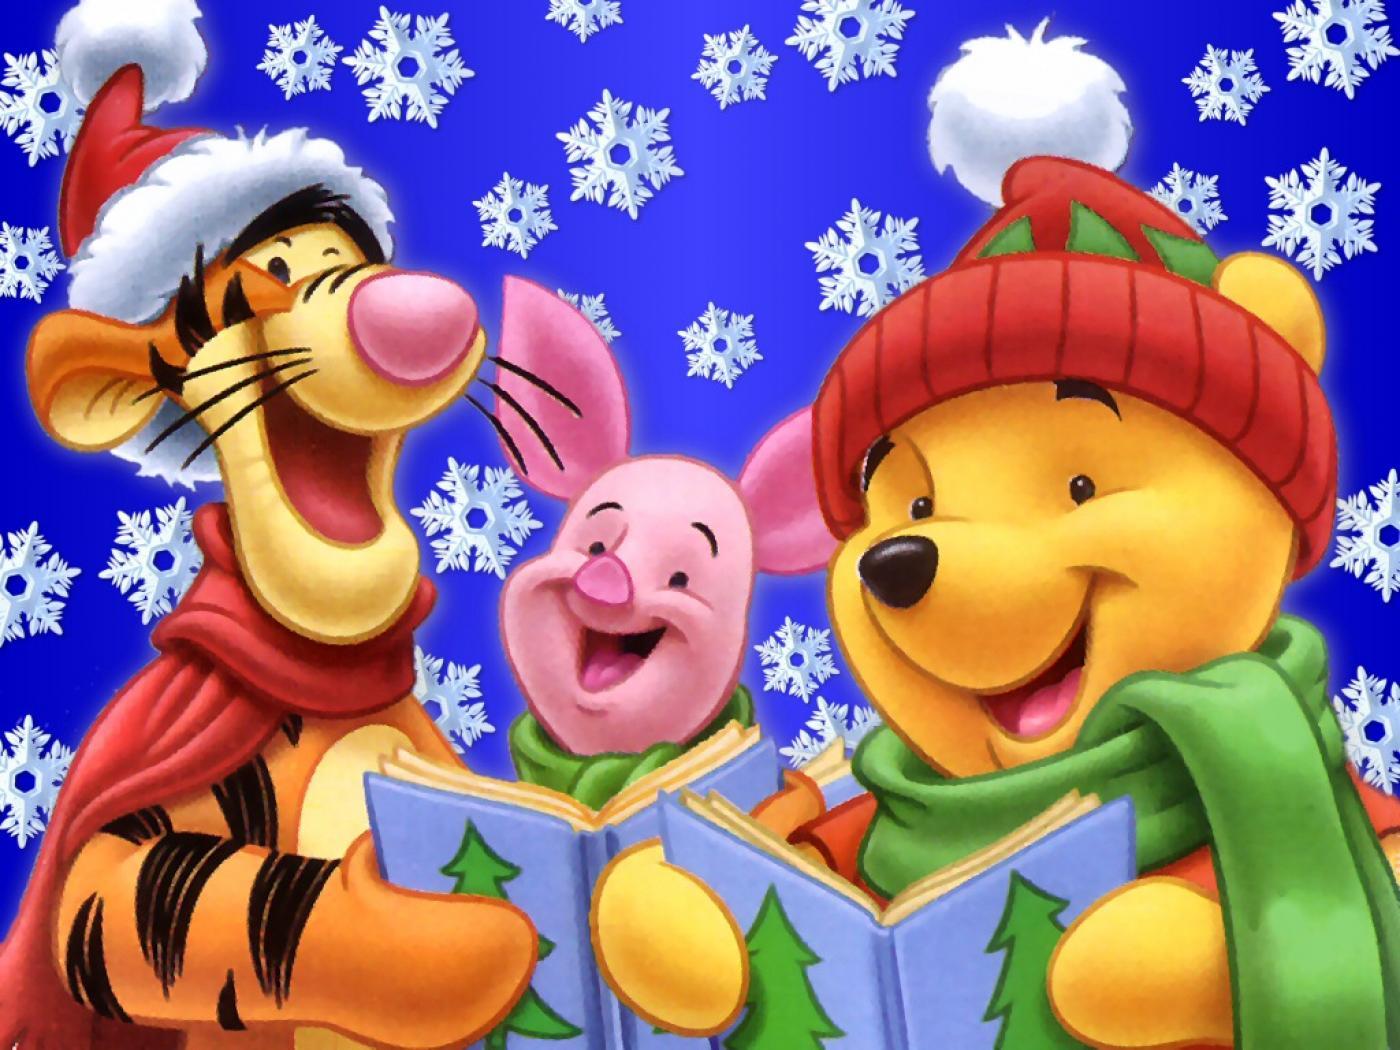 Winnie the Pooh Christmas Wallpapers - Top Free Winnie the Pooh